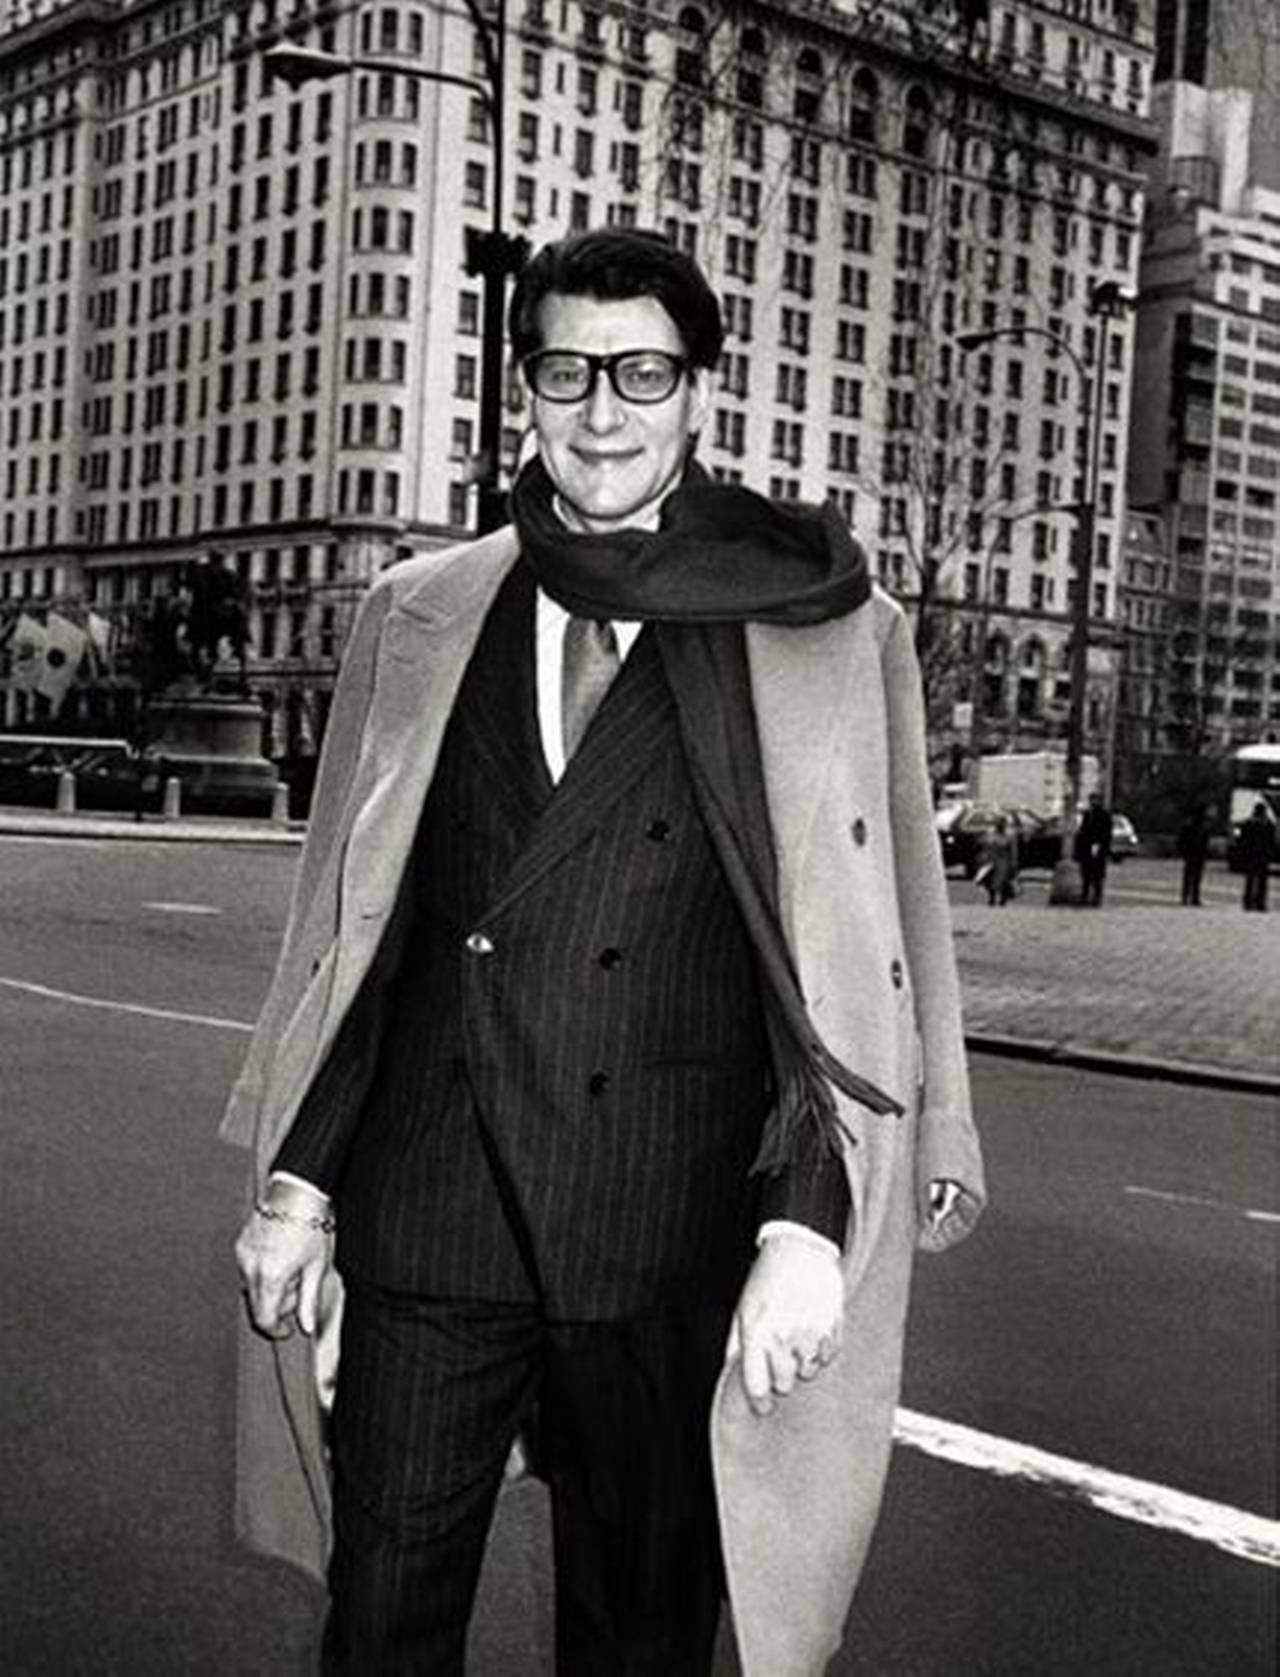 Roxanne Lowit Black and White Photograph - Yves Saint Laurent in NY